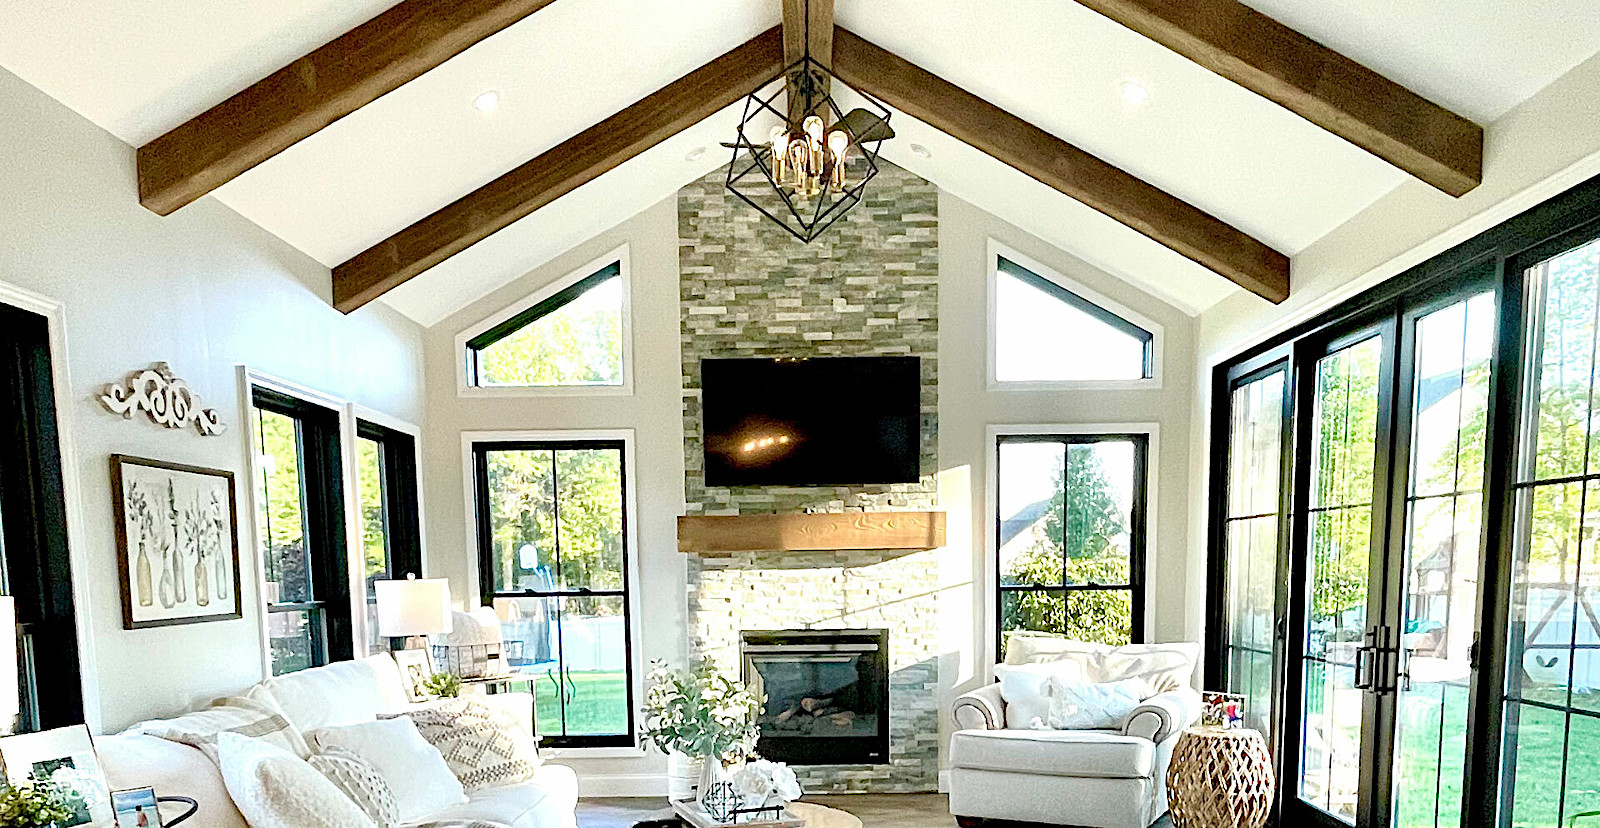 Clearance faux wood beams